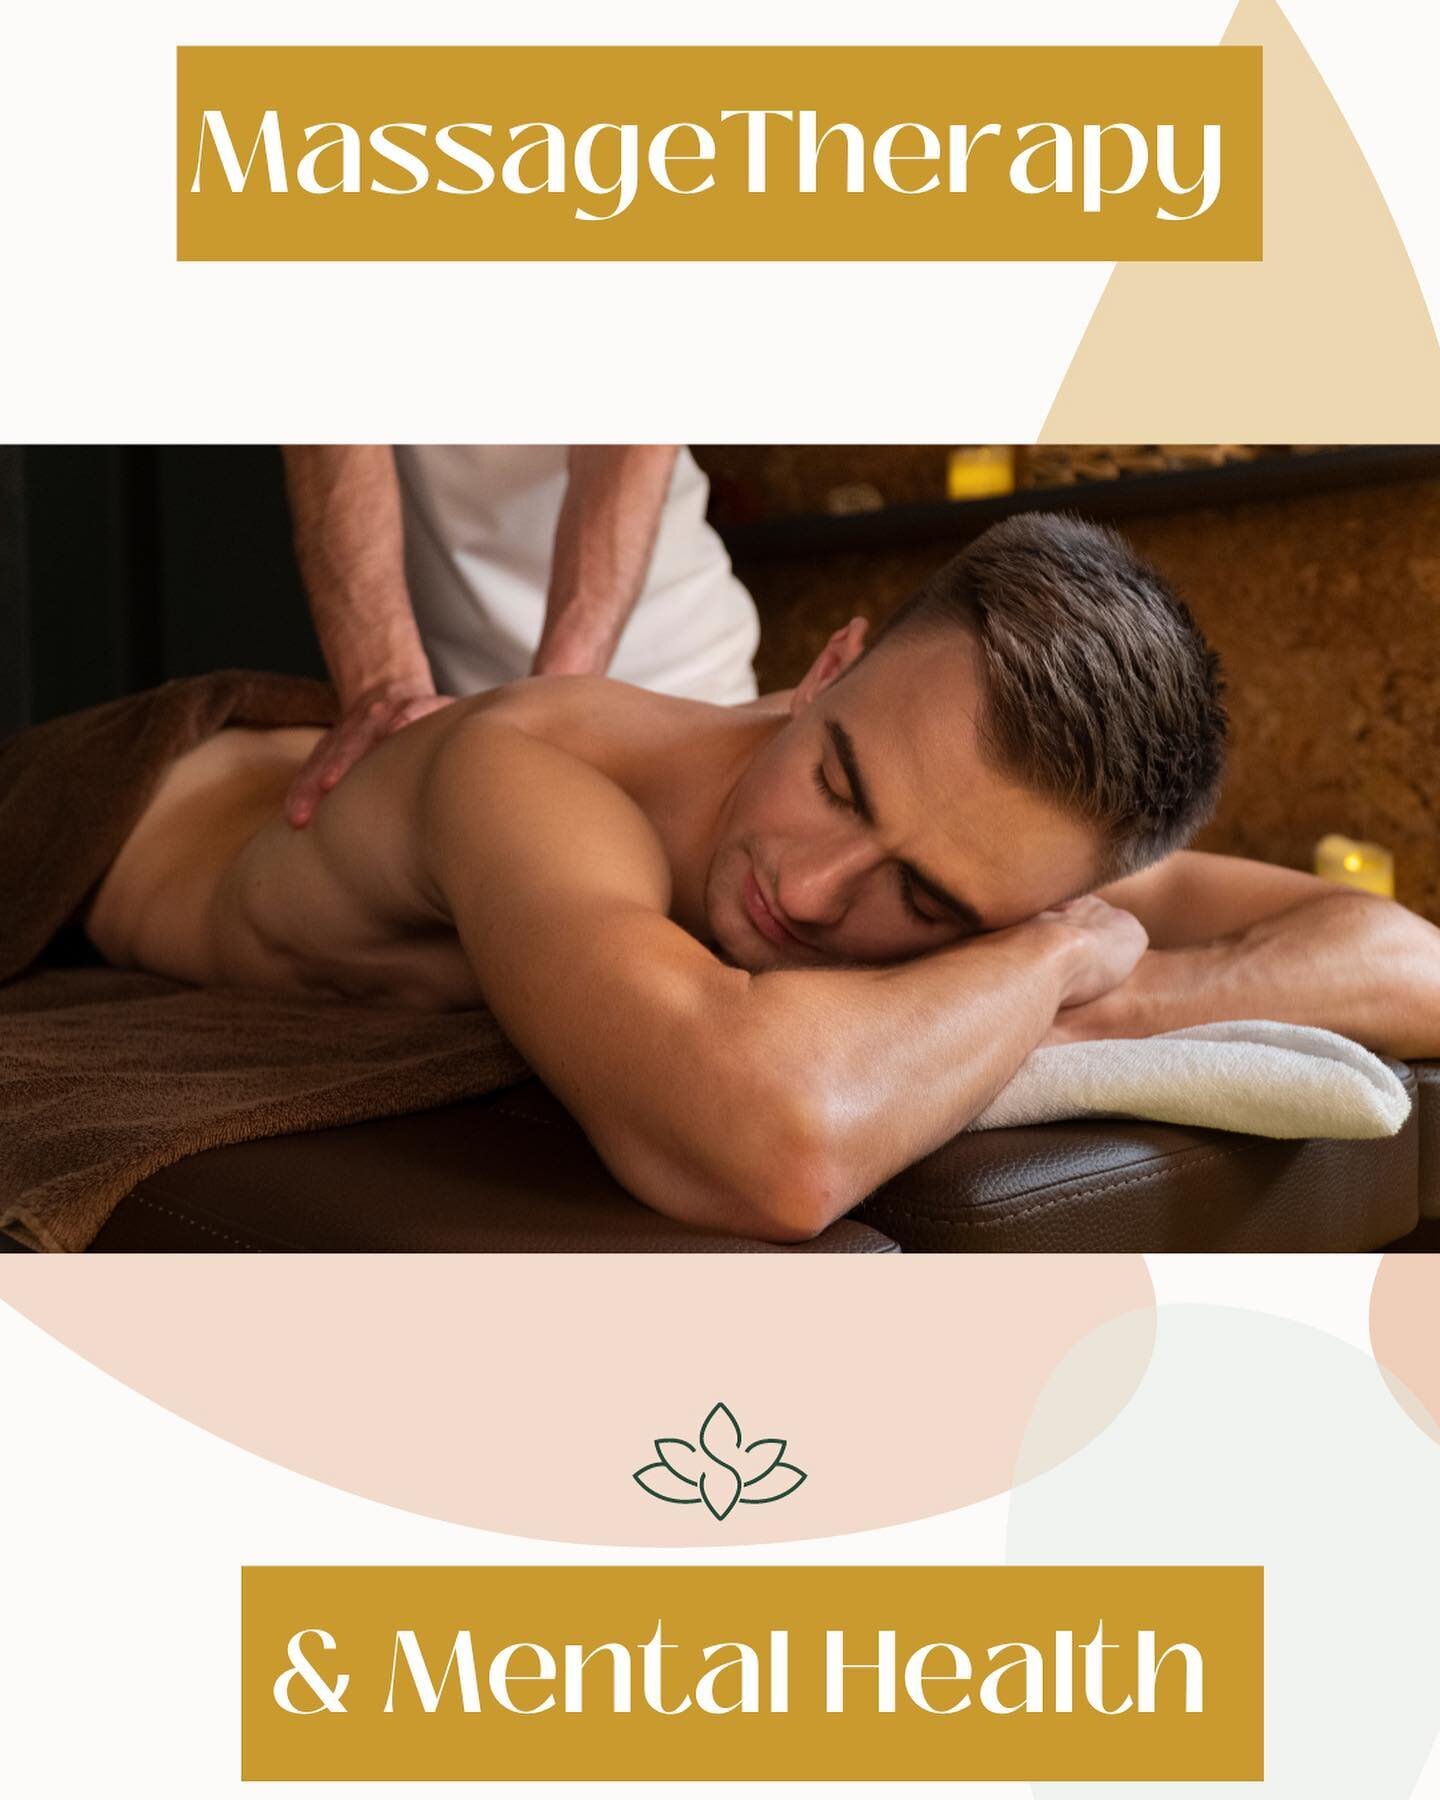 A good Massage can&hellip;..

🍃TOUCH the body

🌷HEAL the mind

🪷CALM the spirit
.
.
.

#skincare #massage #orlando #relax